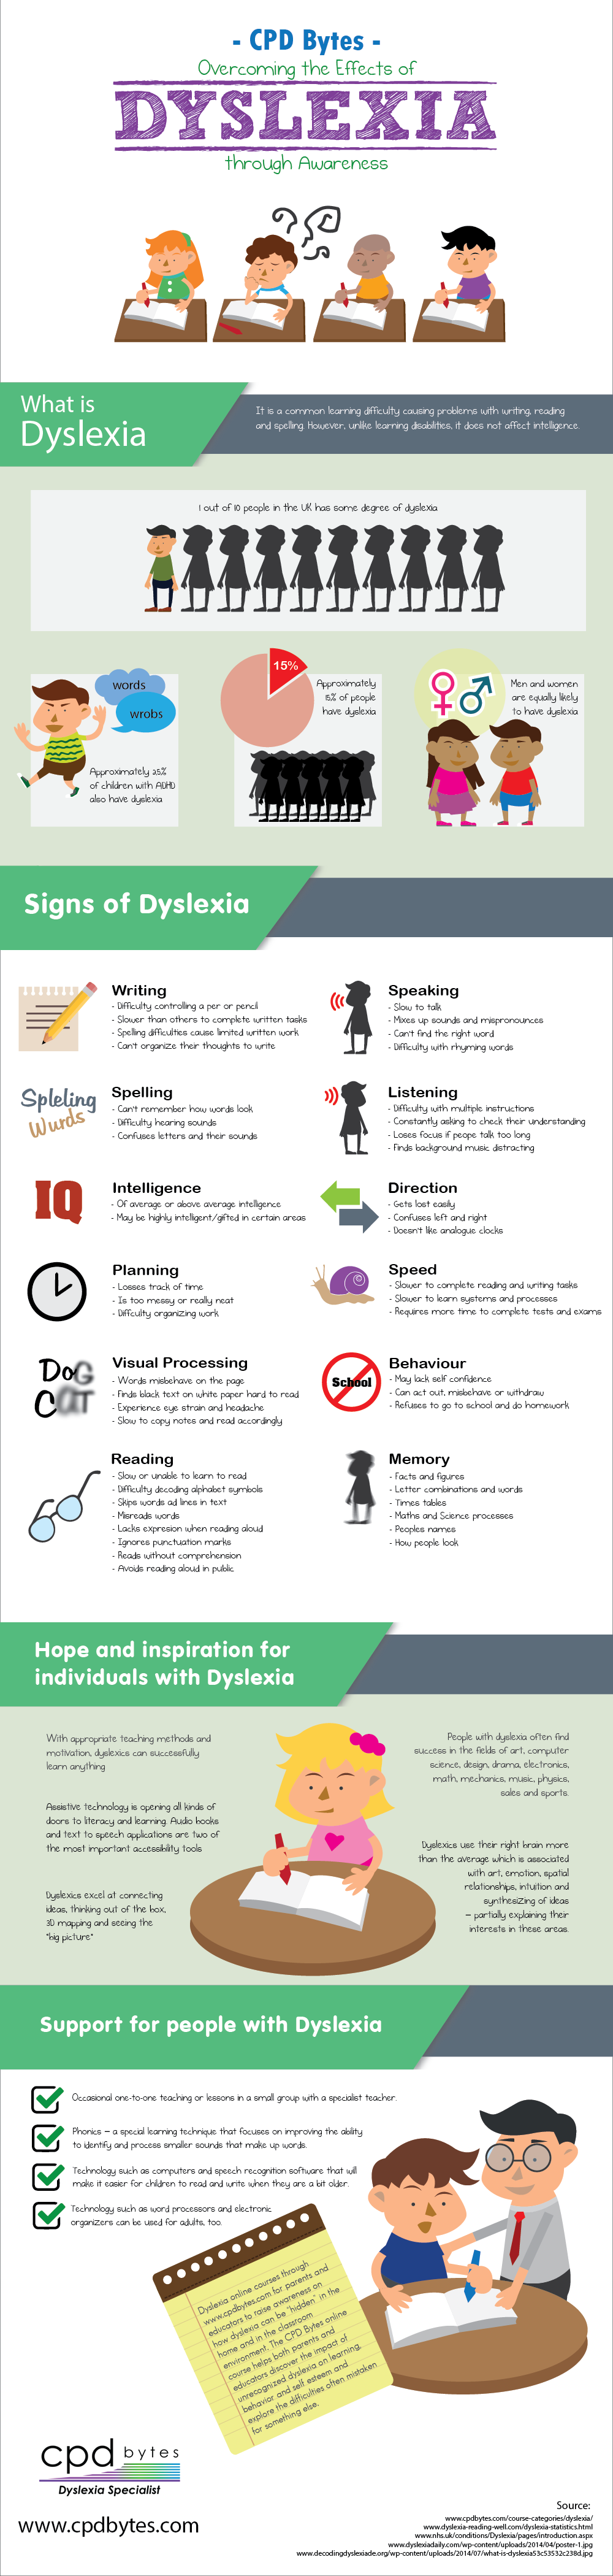 overcoming-effects-of-dyslexia-infographic